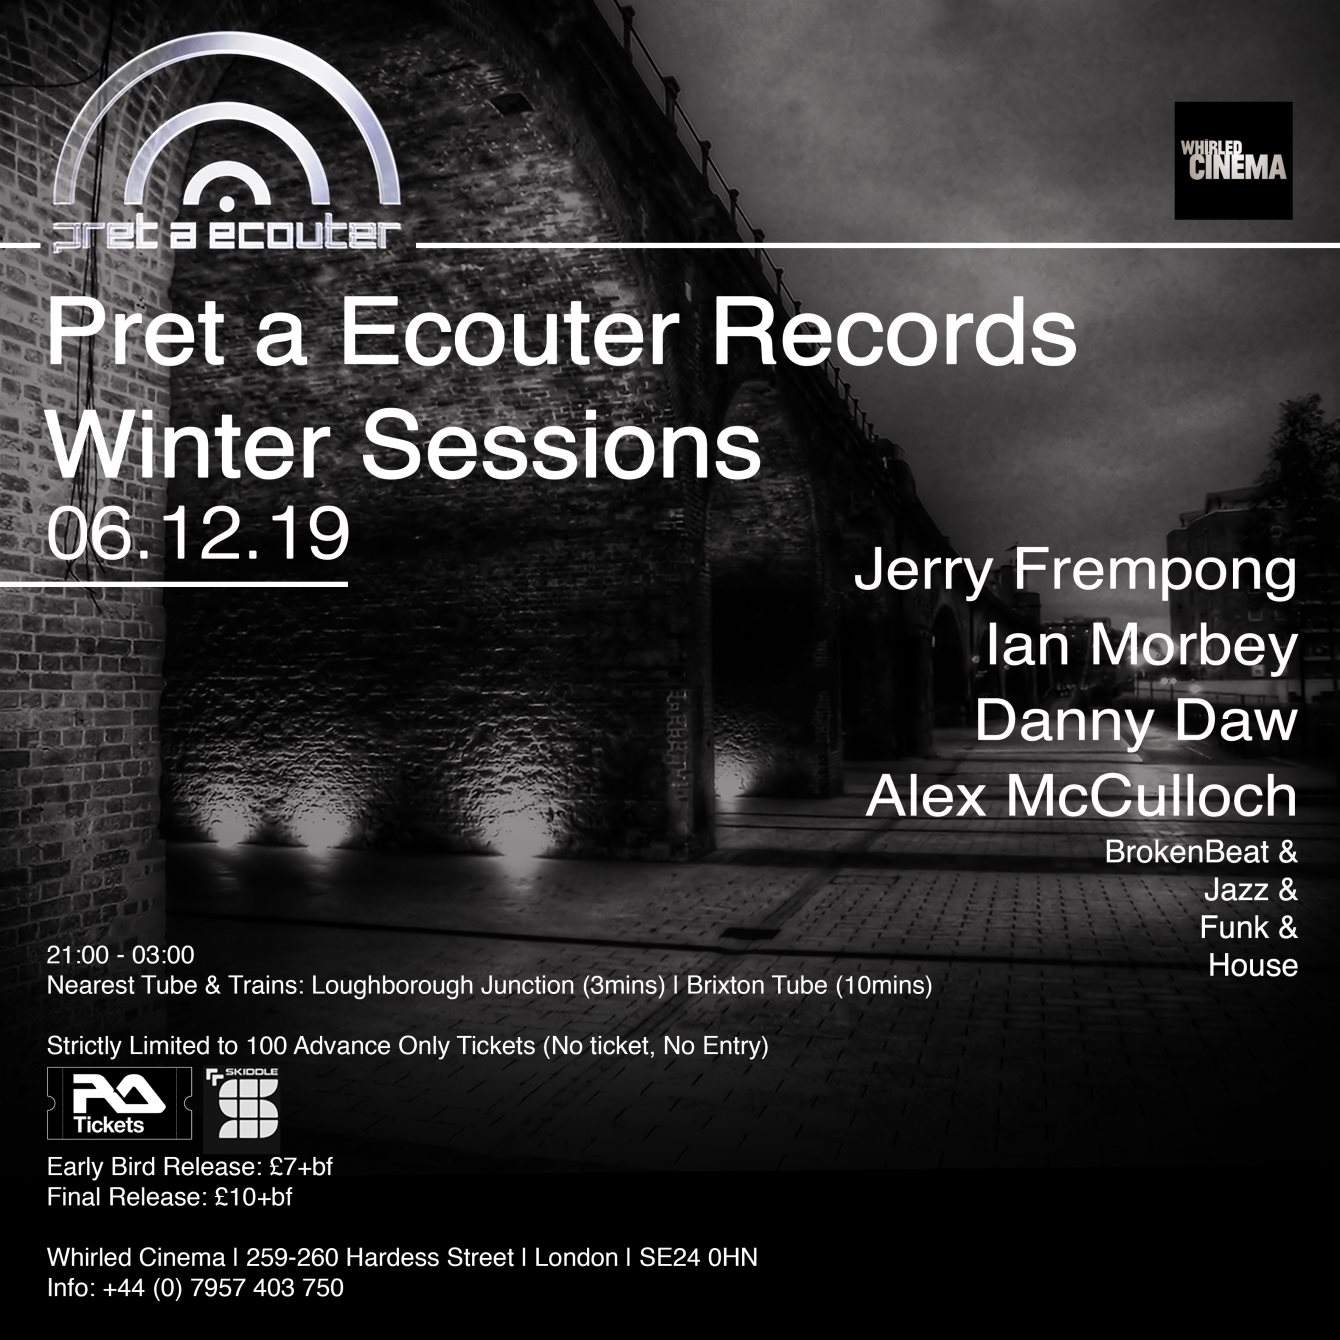 Pret A Ecouter Records Winter Sessions - Página frontal